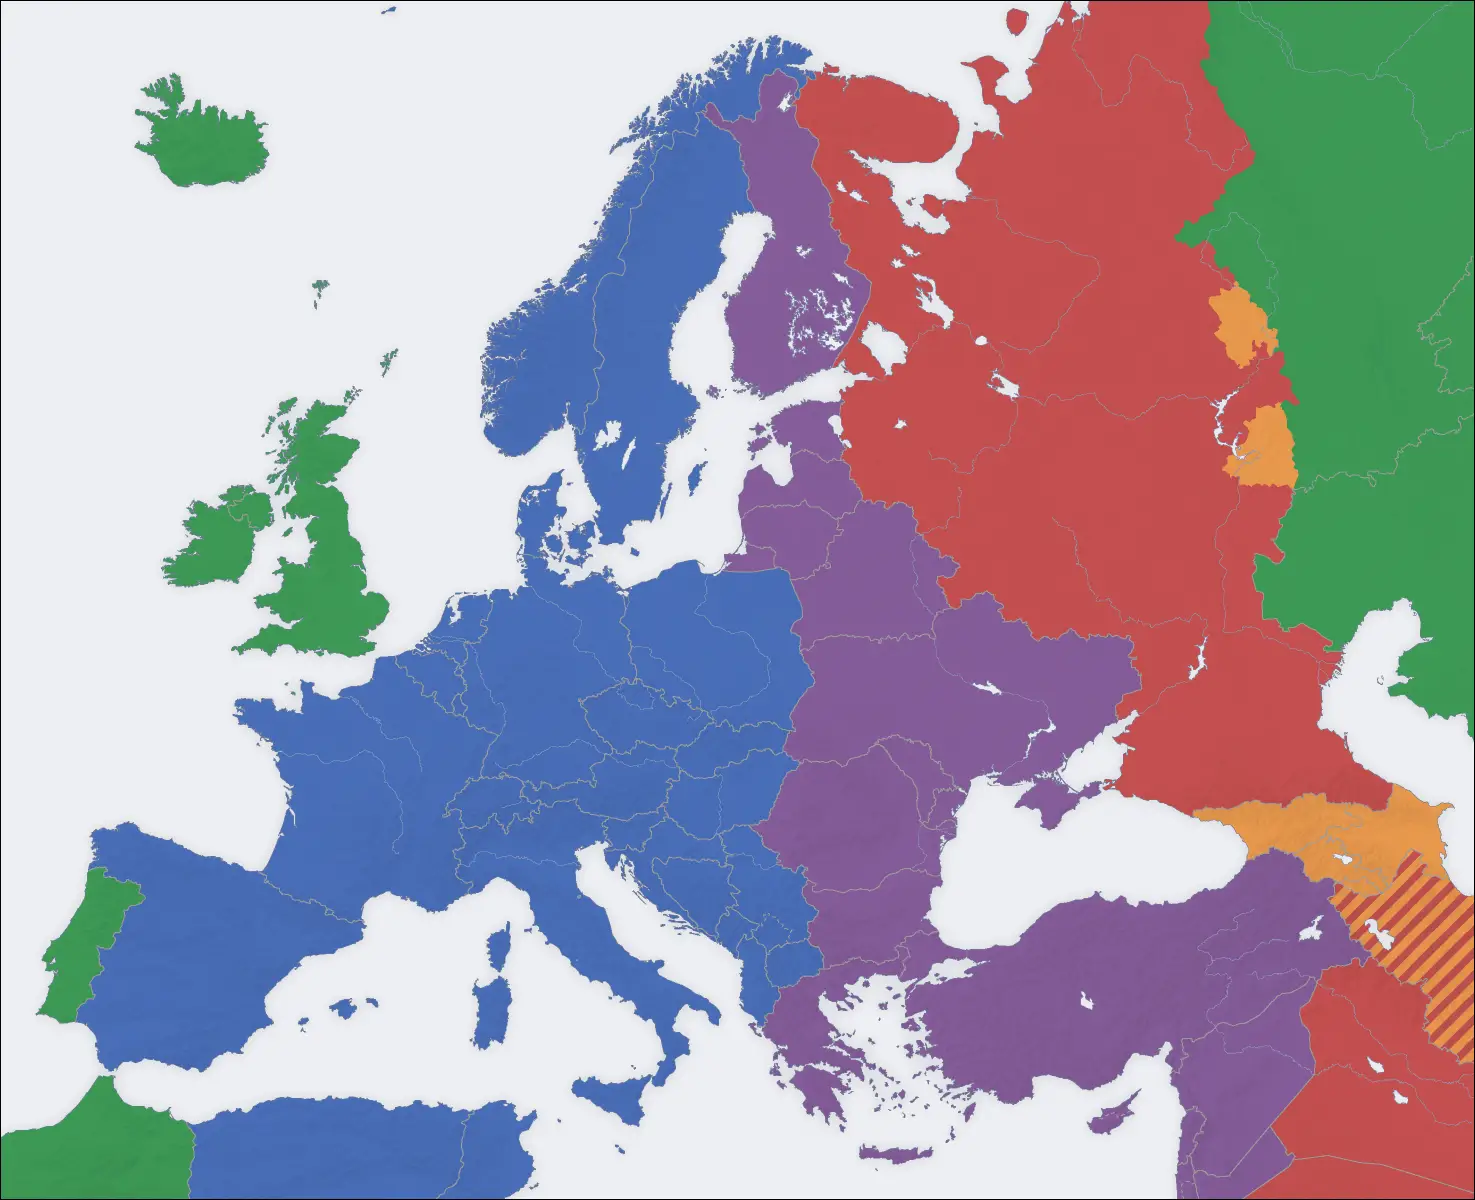 Europe Time Zones Map